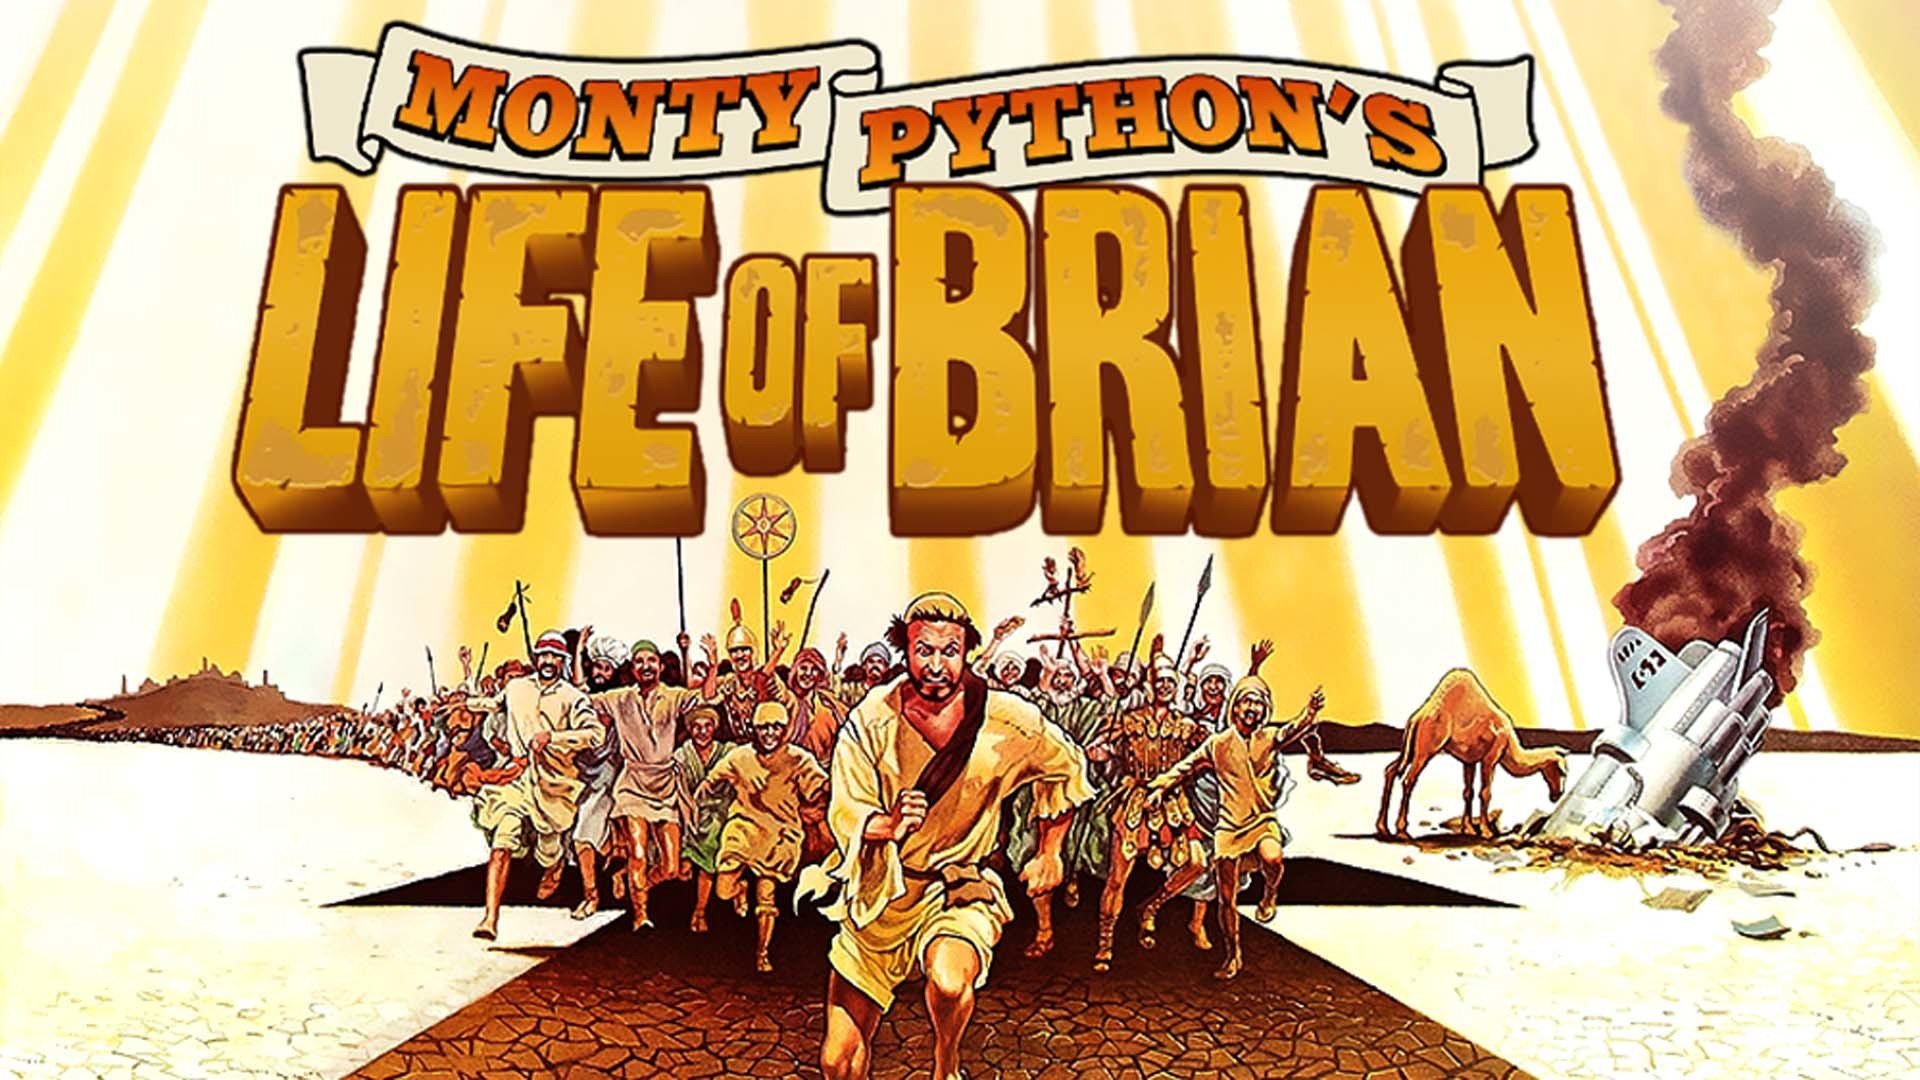 44-facts-about-the-movie-life-of-brian